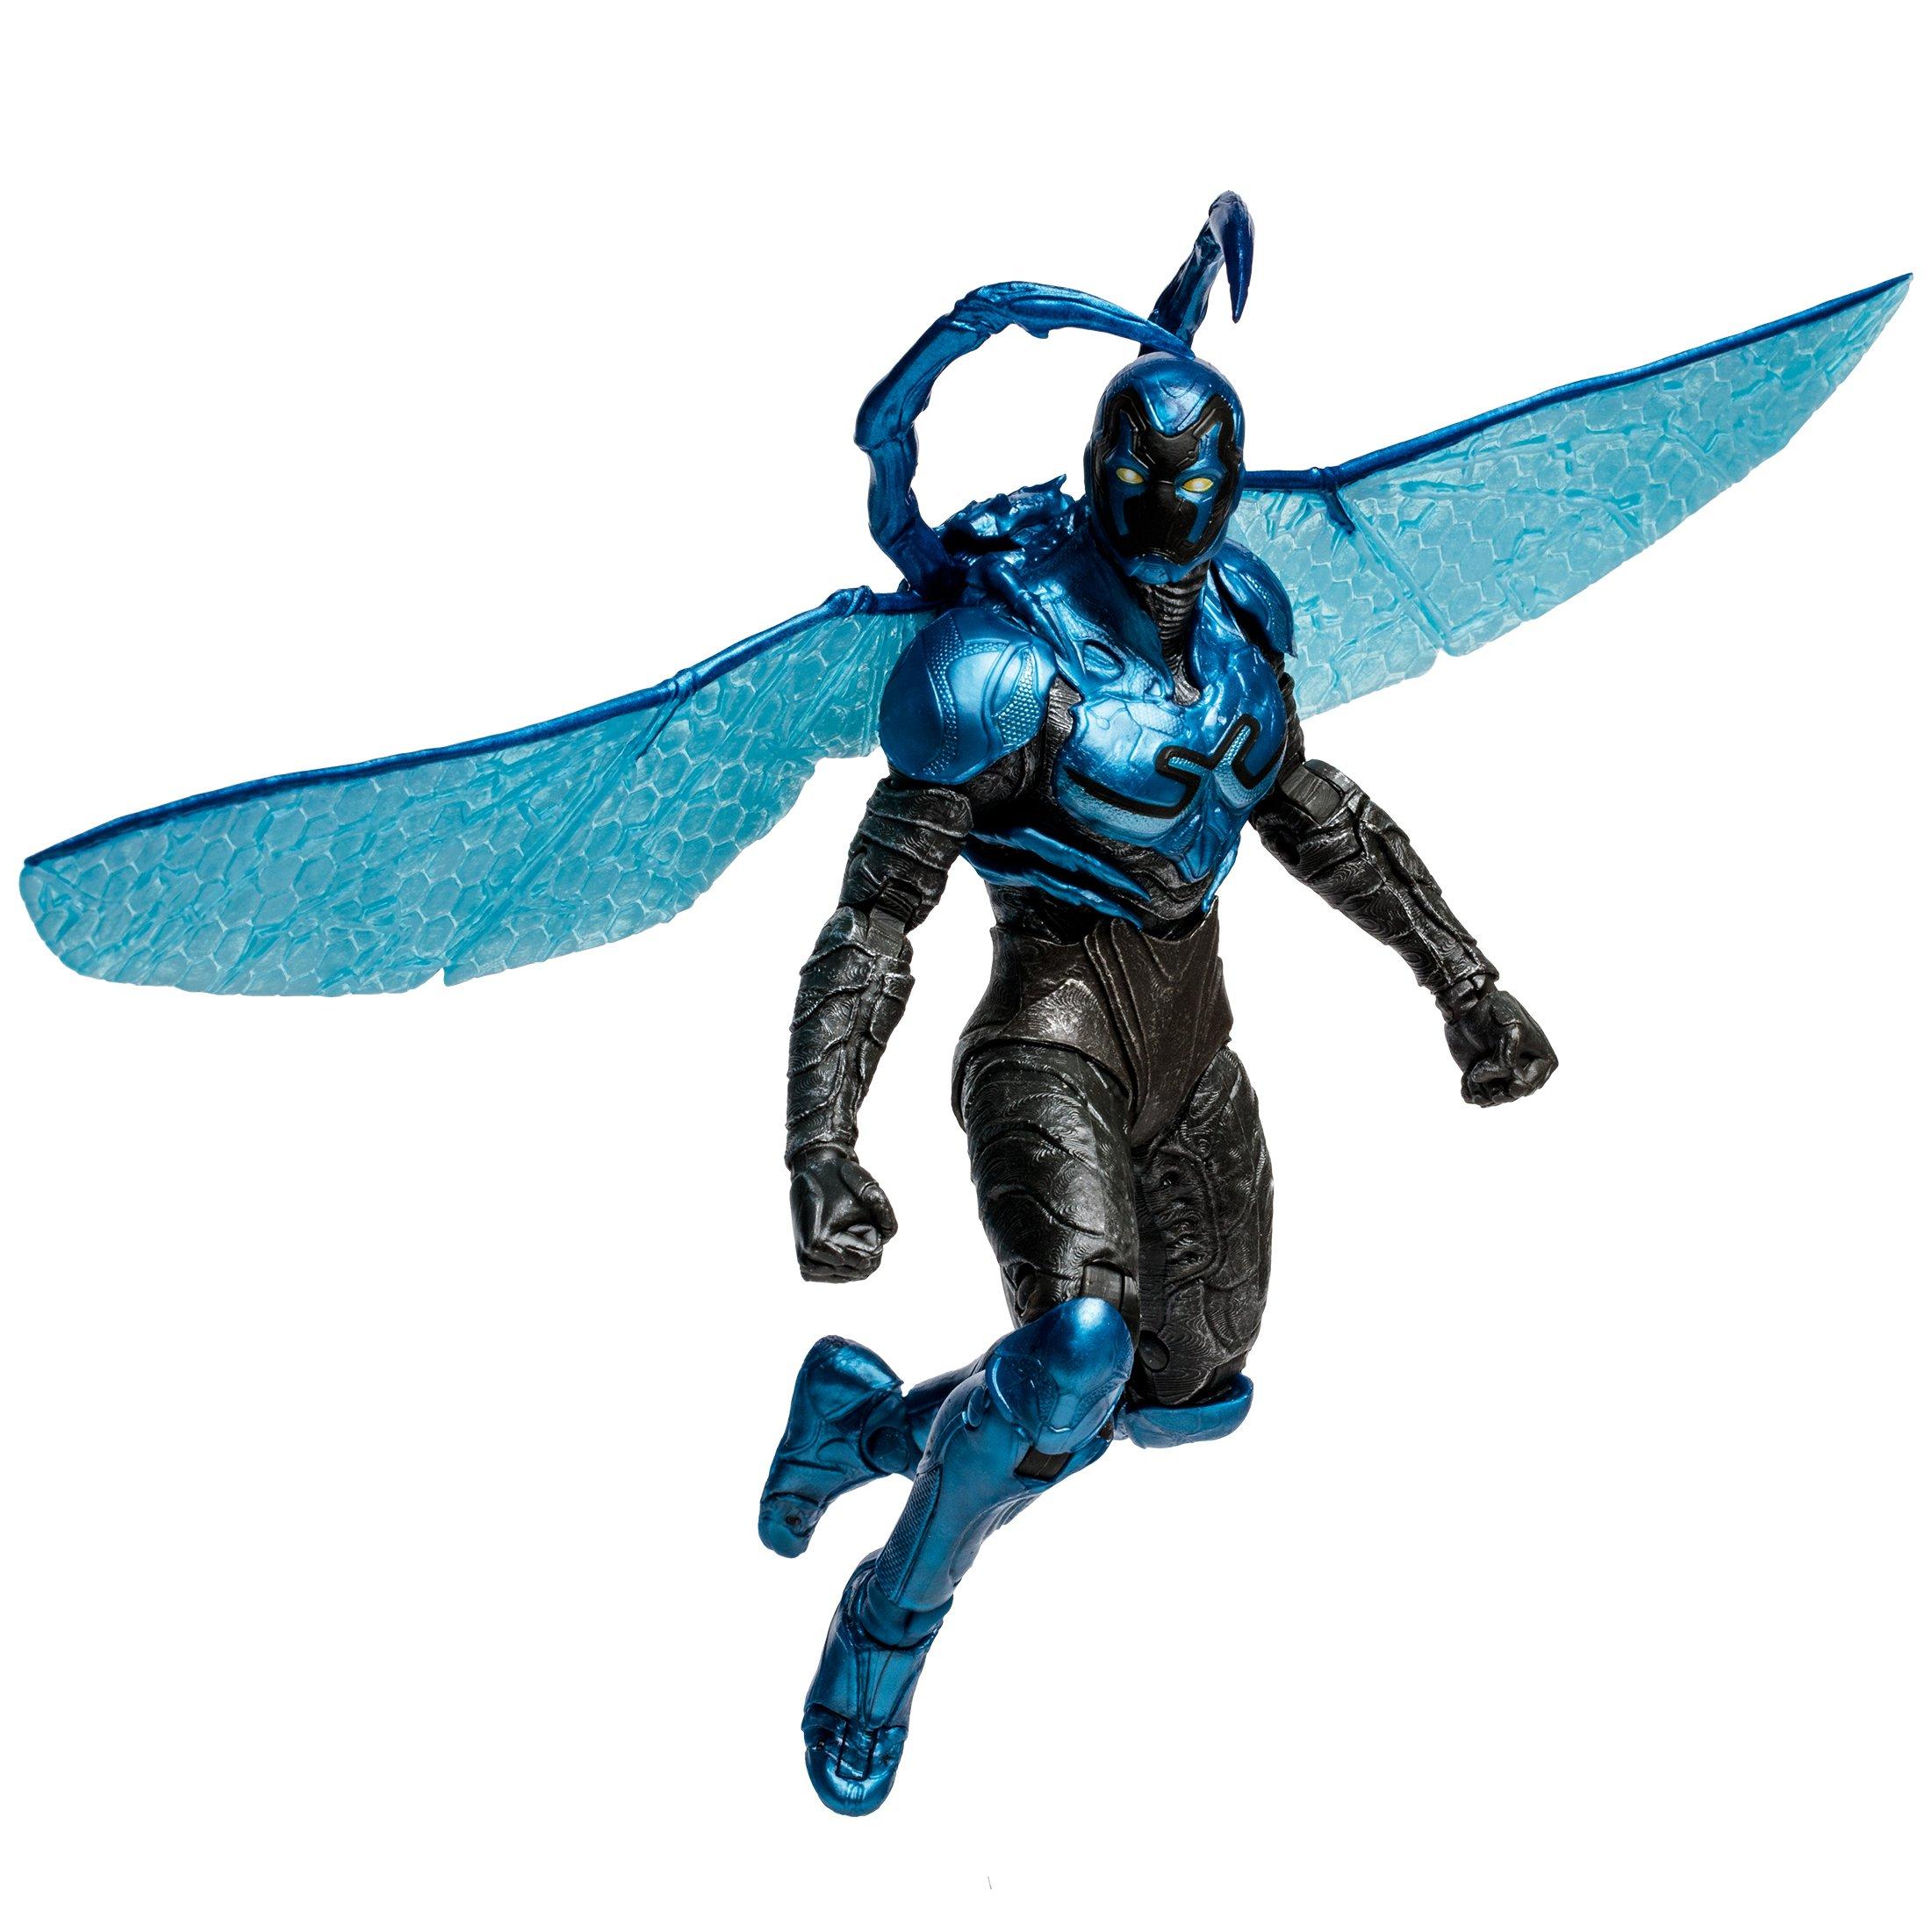 Blue Beetle” superbly blends action and fun